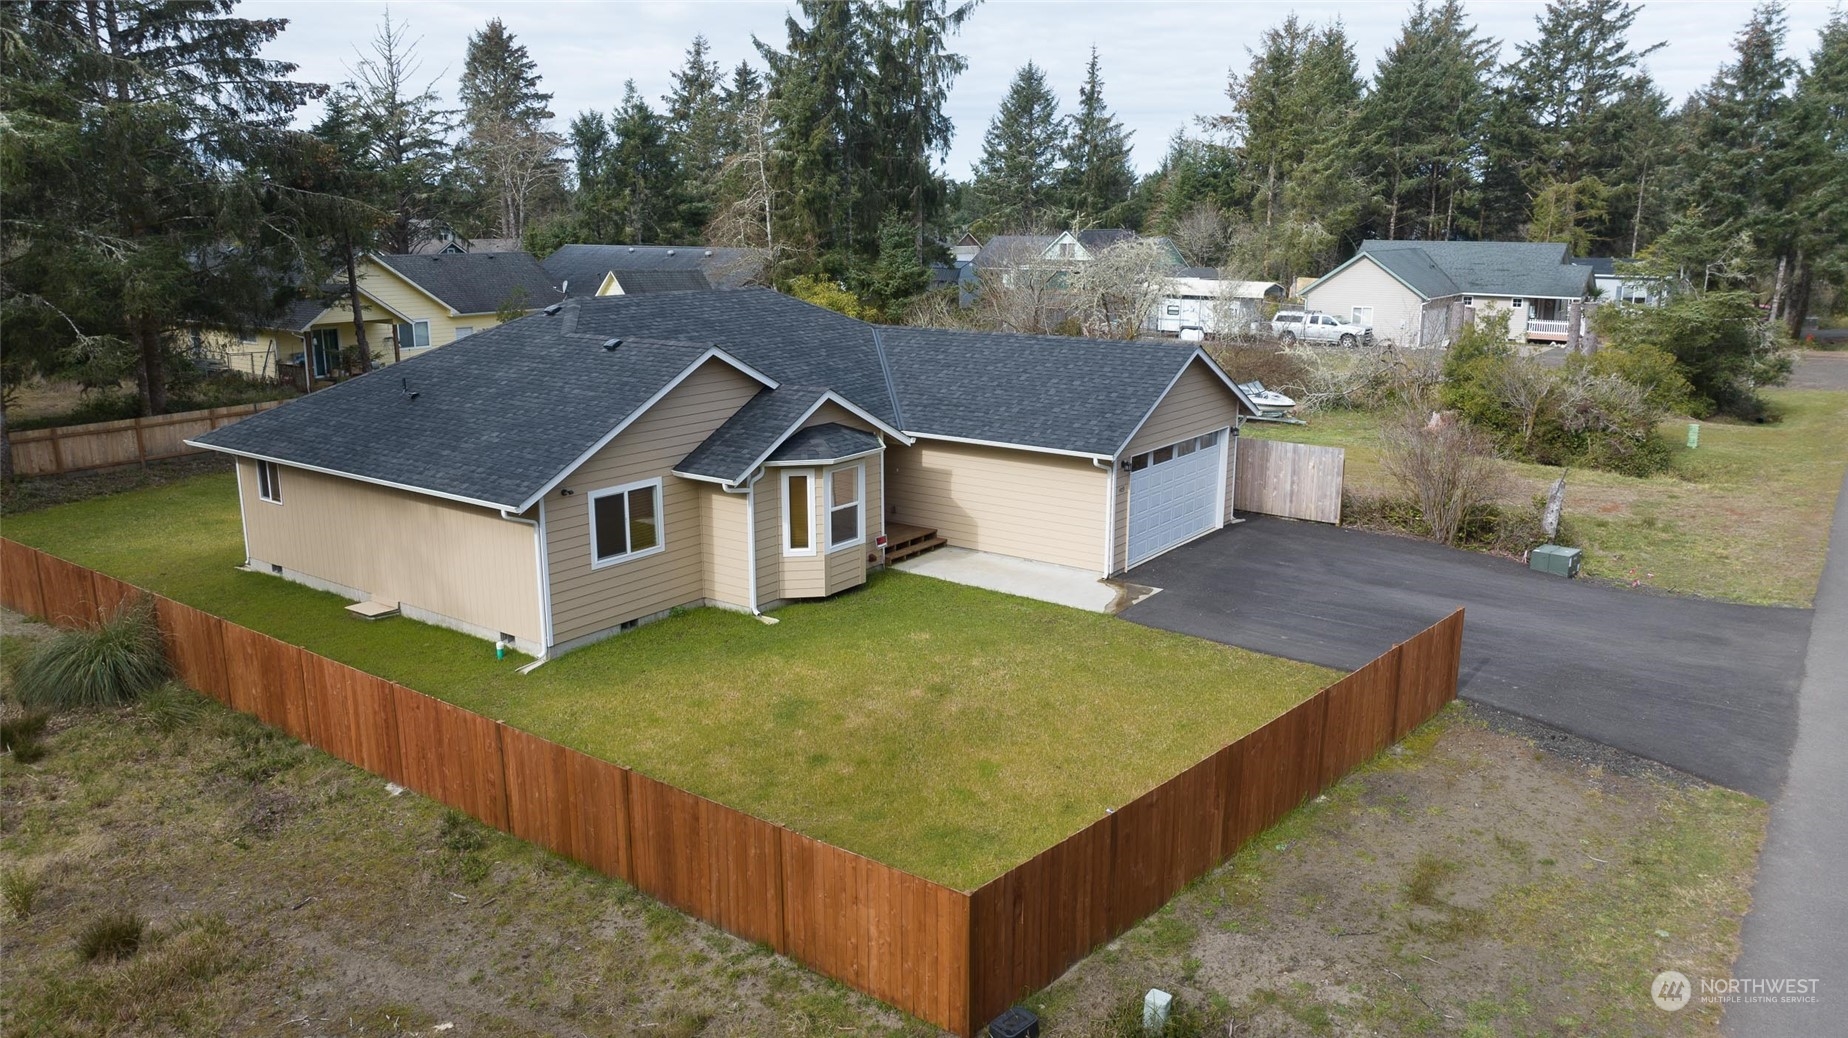 a aerial view of a house in a yard